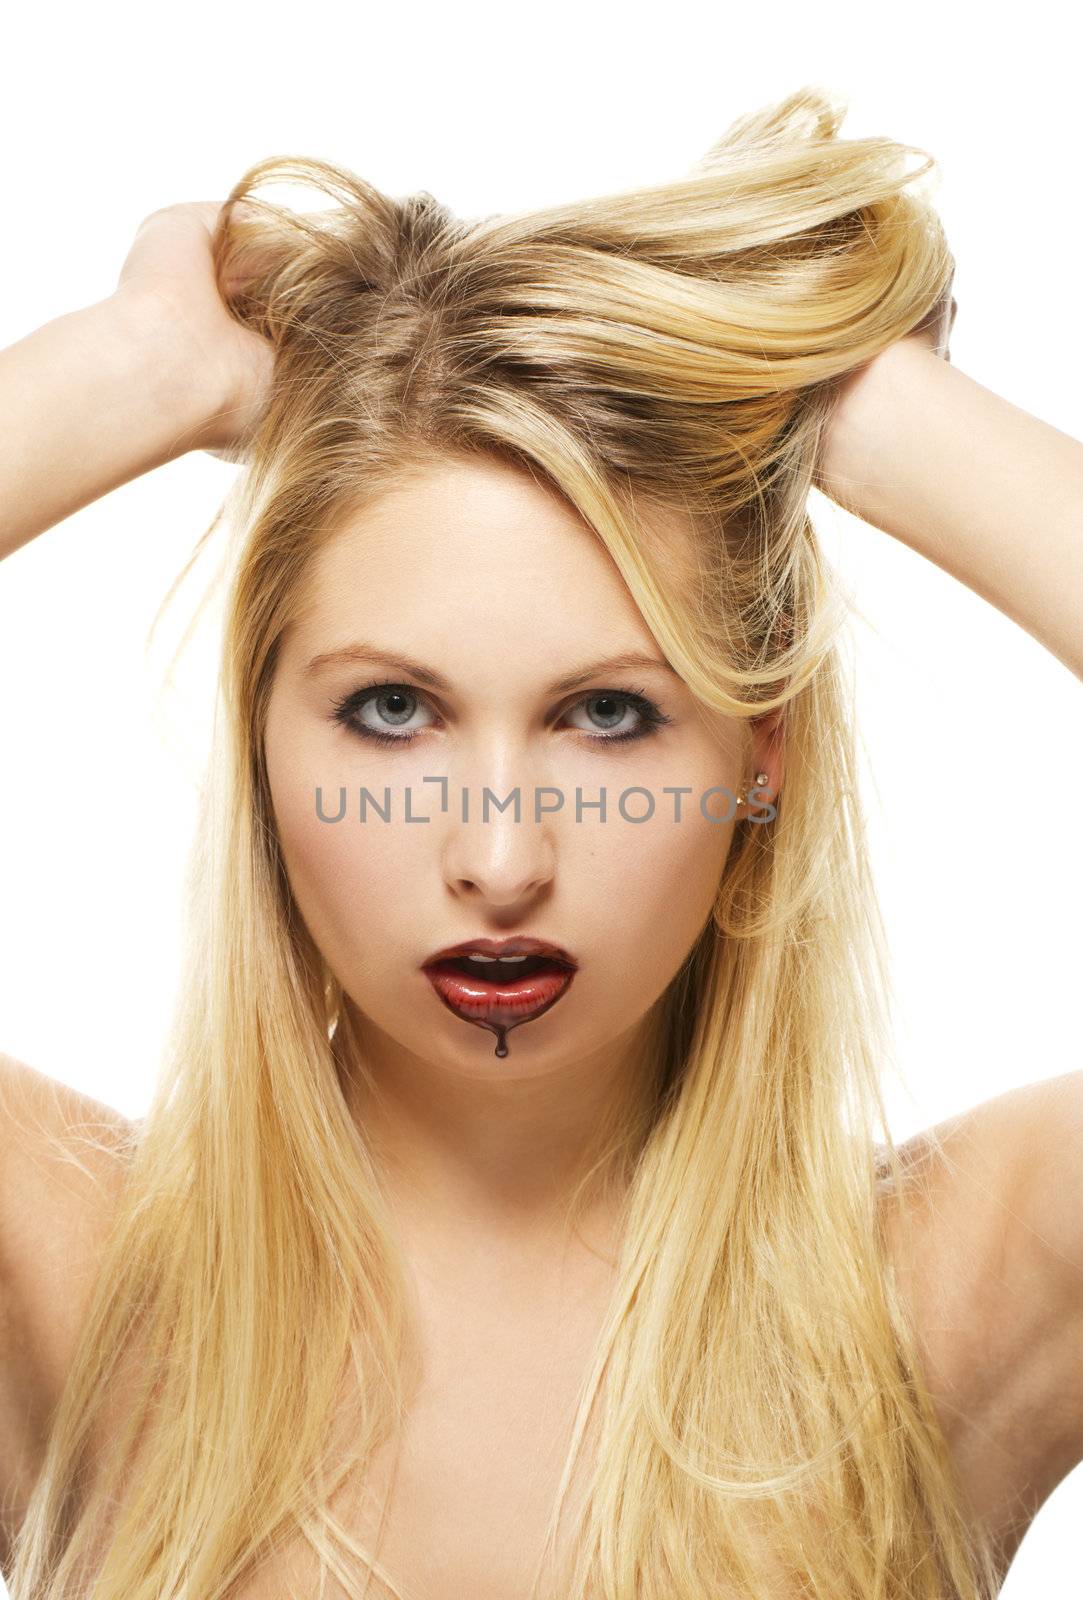 beautiful blonde woman with chocolate covered lips by RobStark